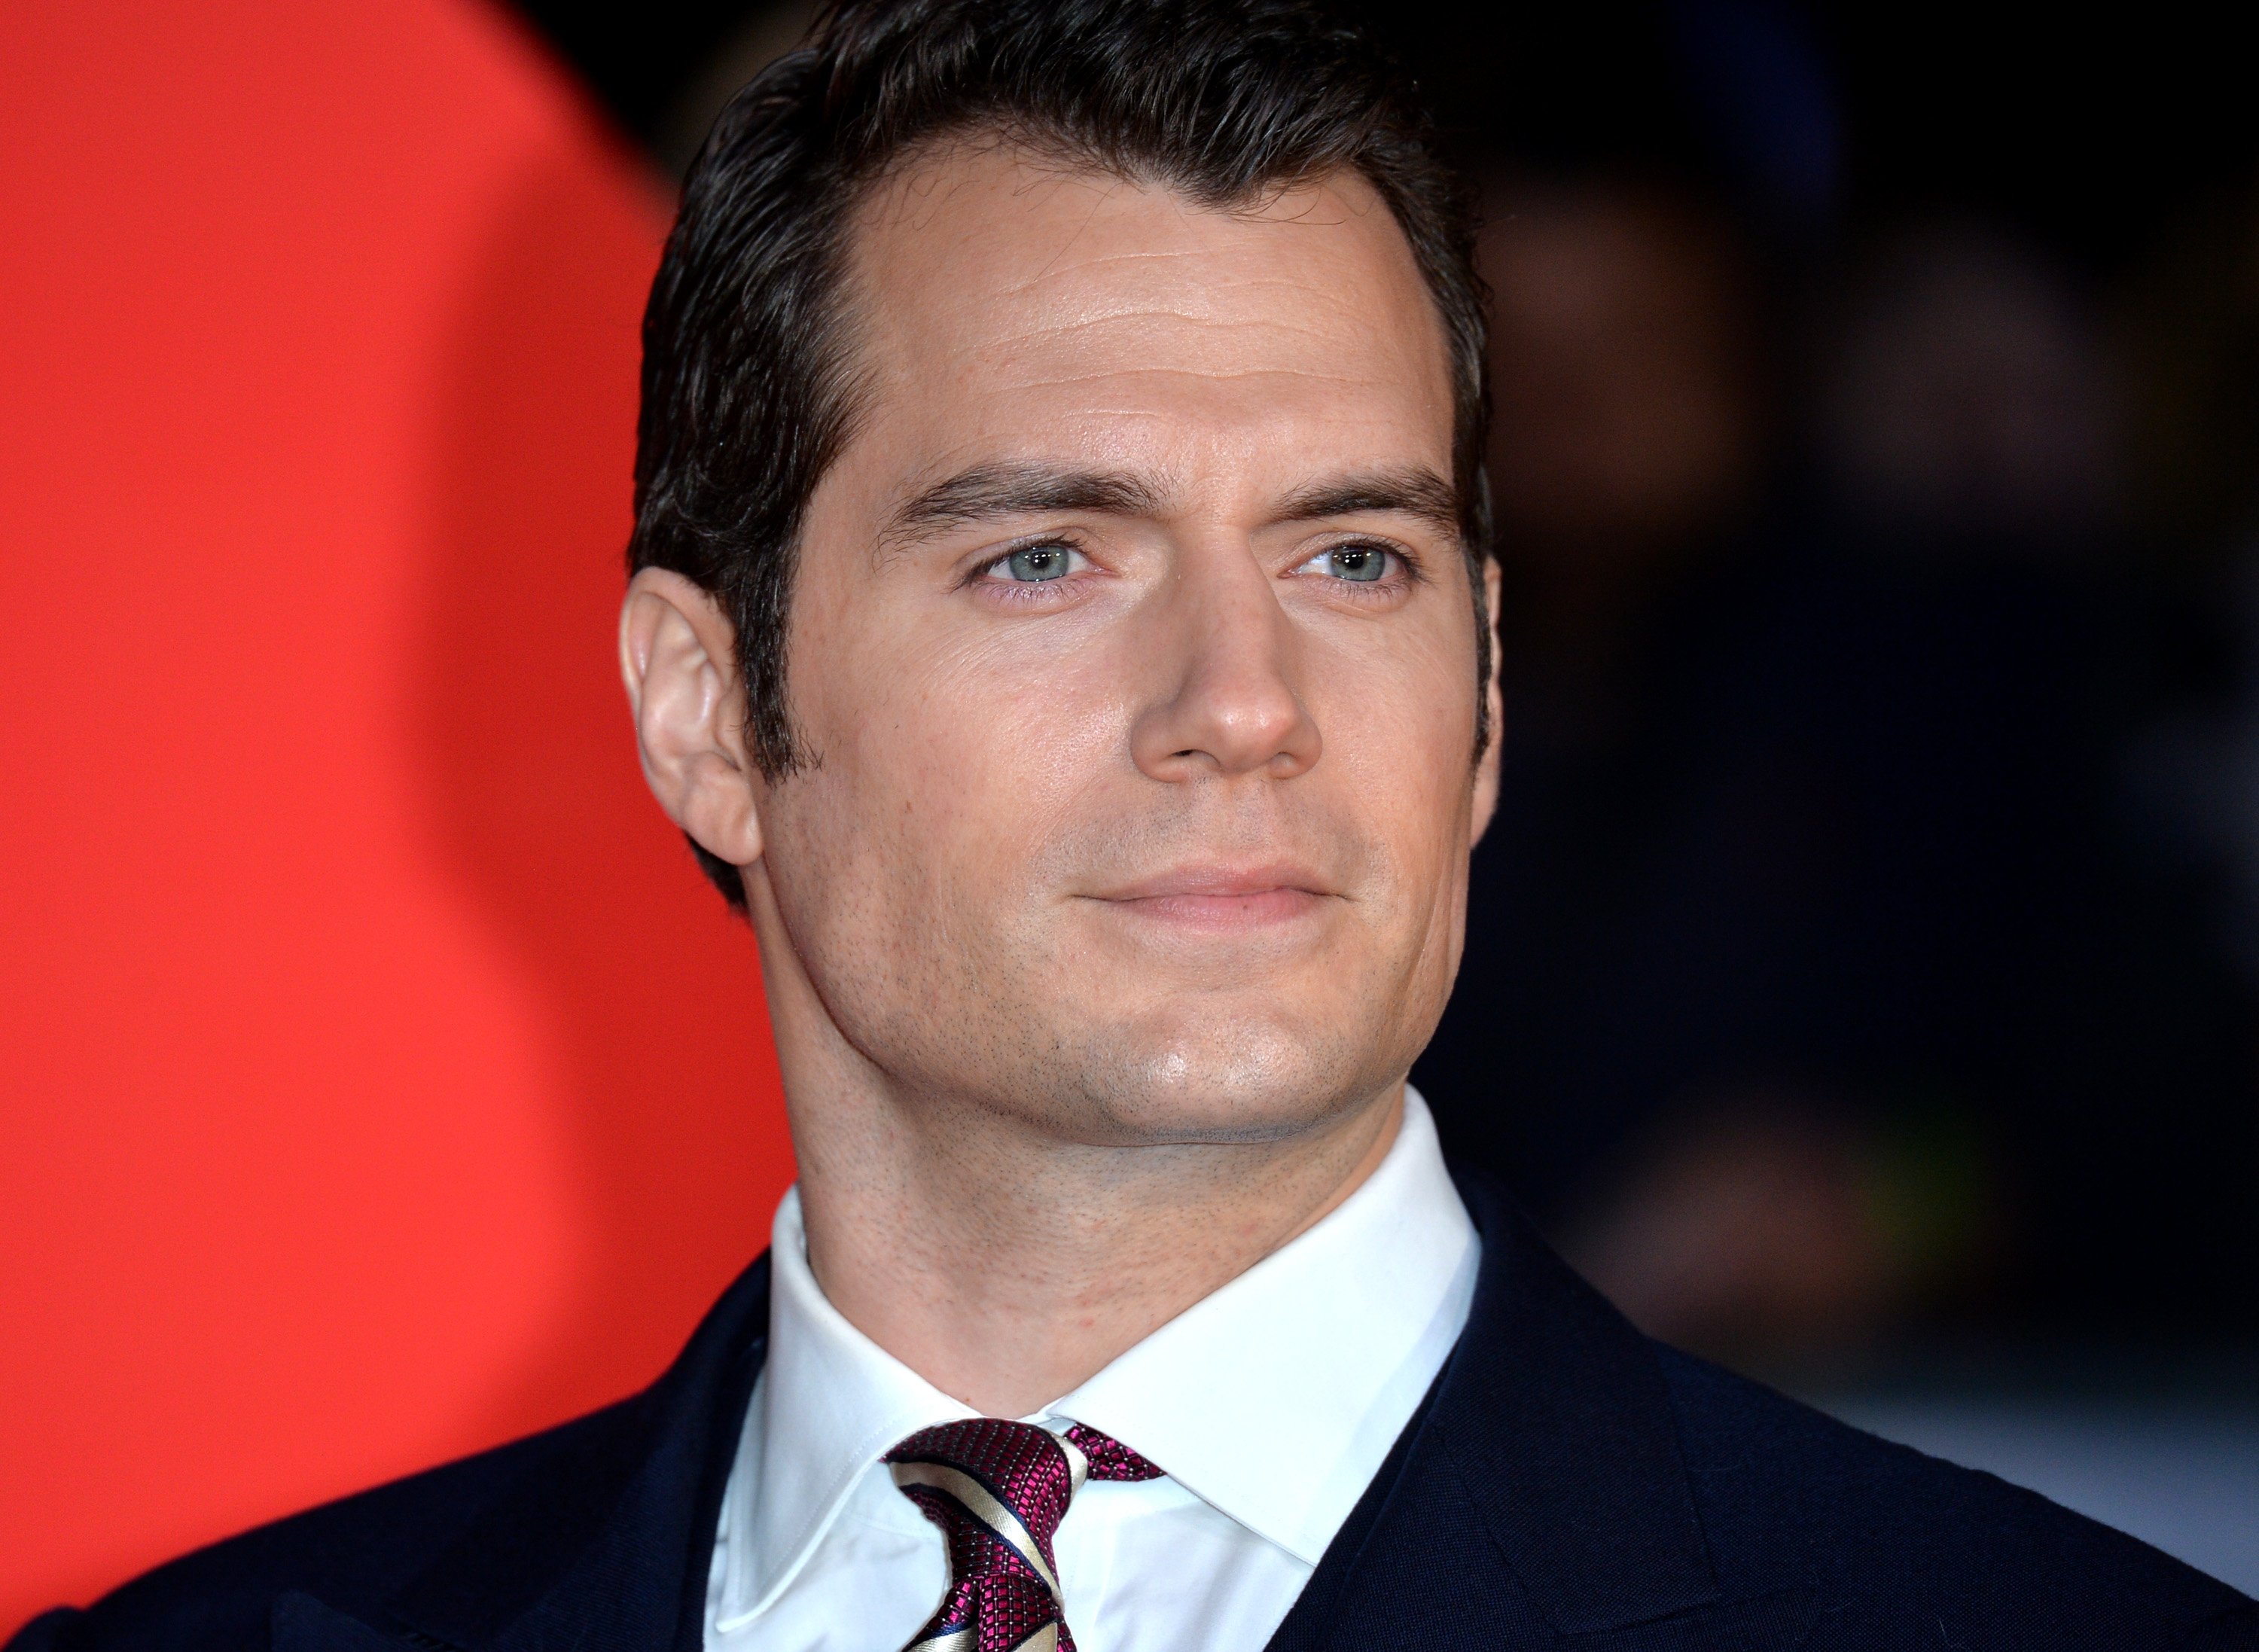 Henry Cavill, who plays Superman in the DC Extended Universe, wears a black suit over a white shirt and red tie.